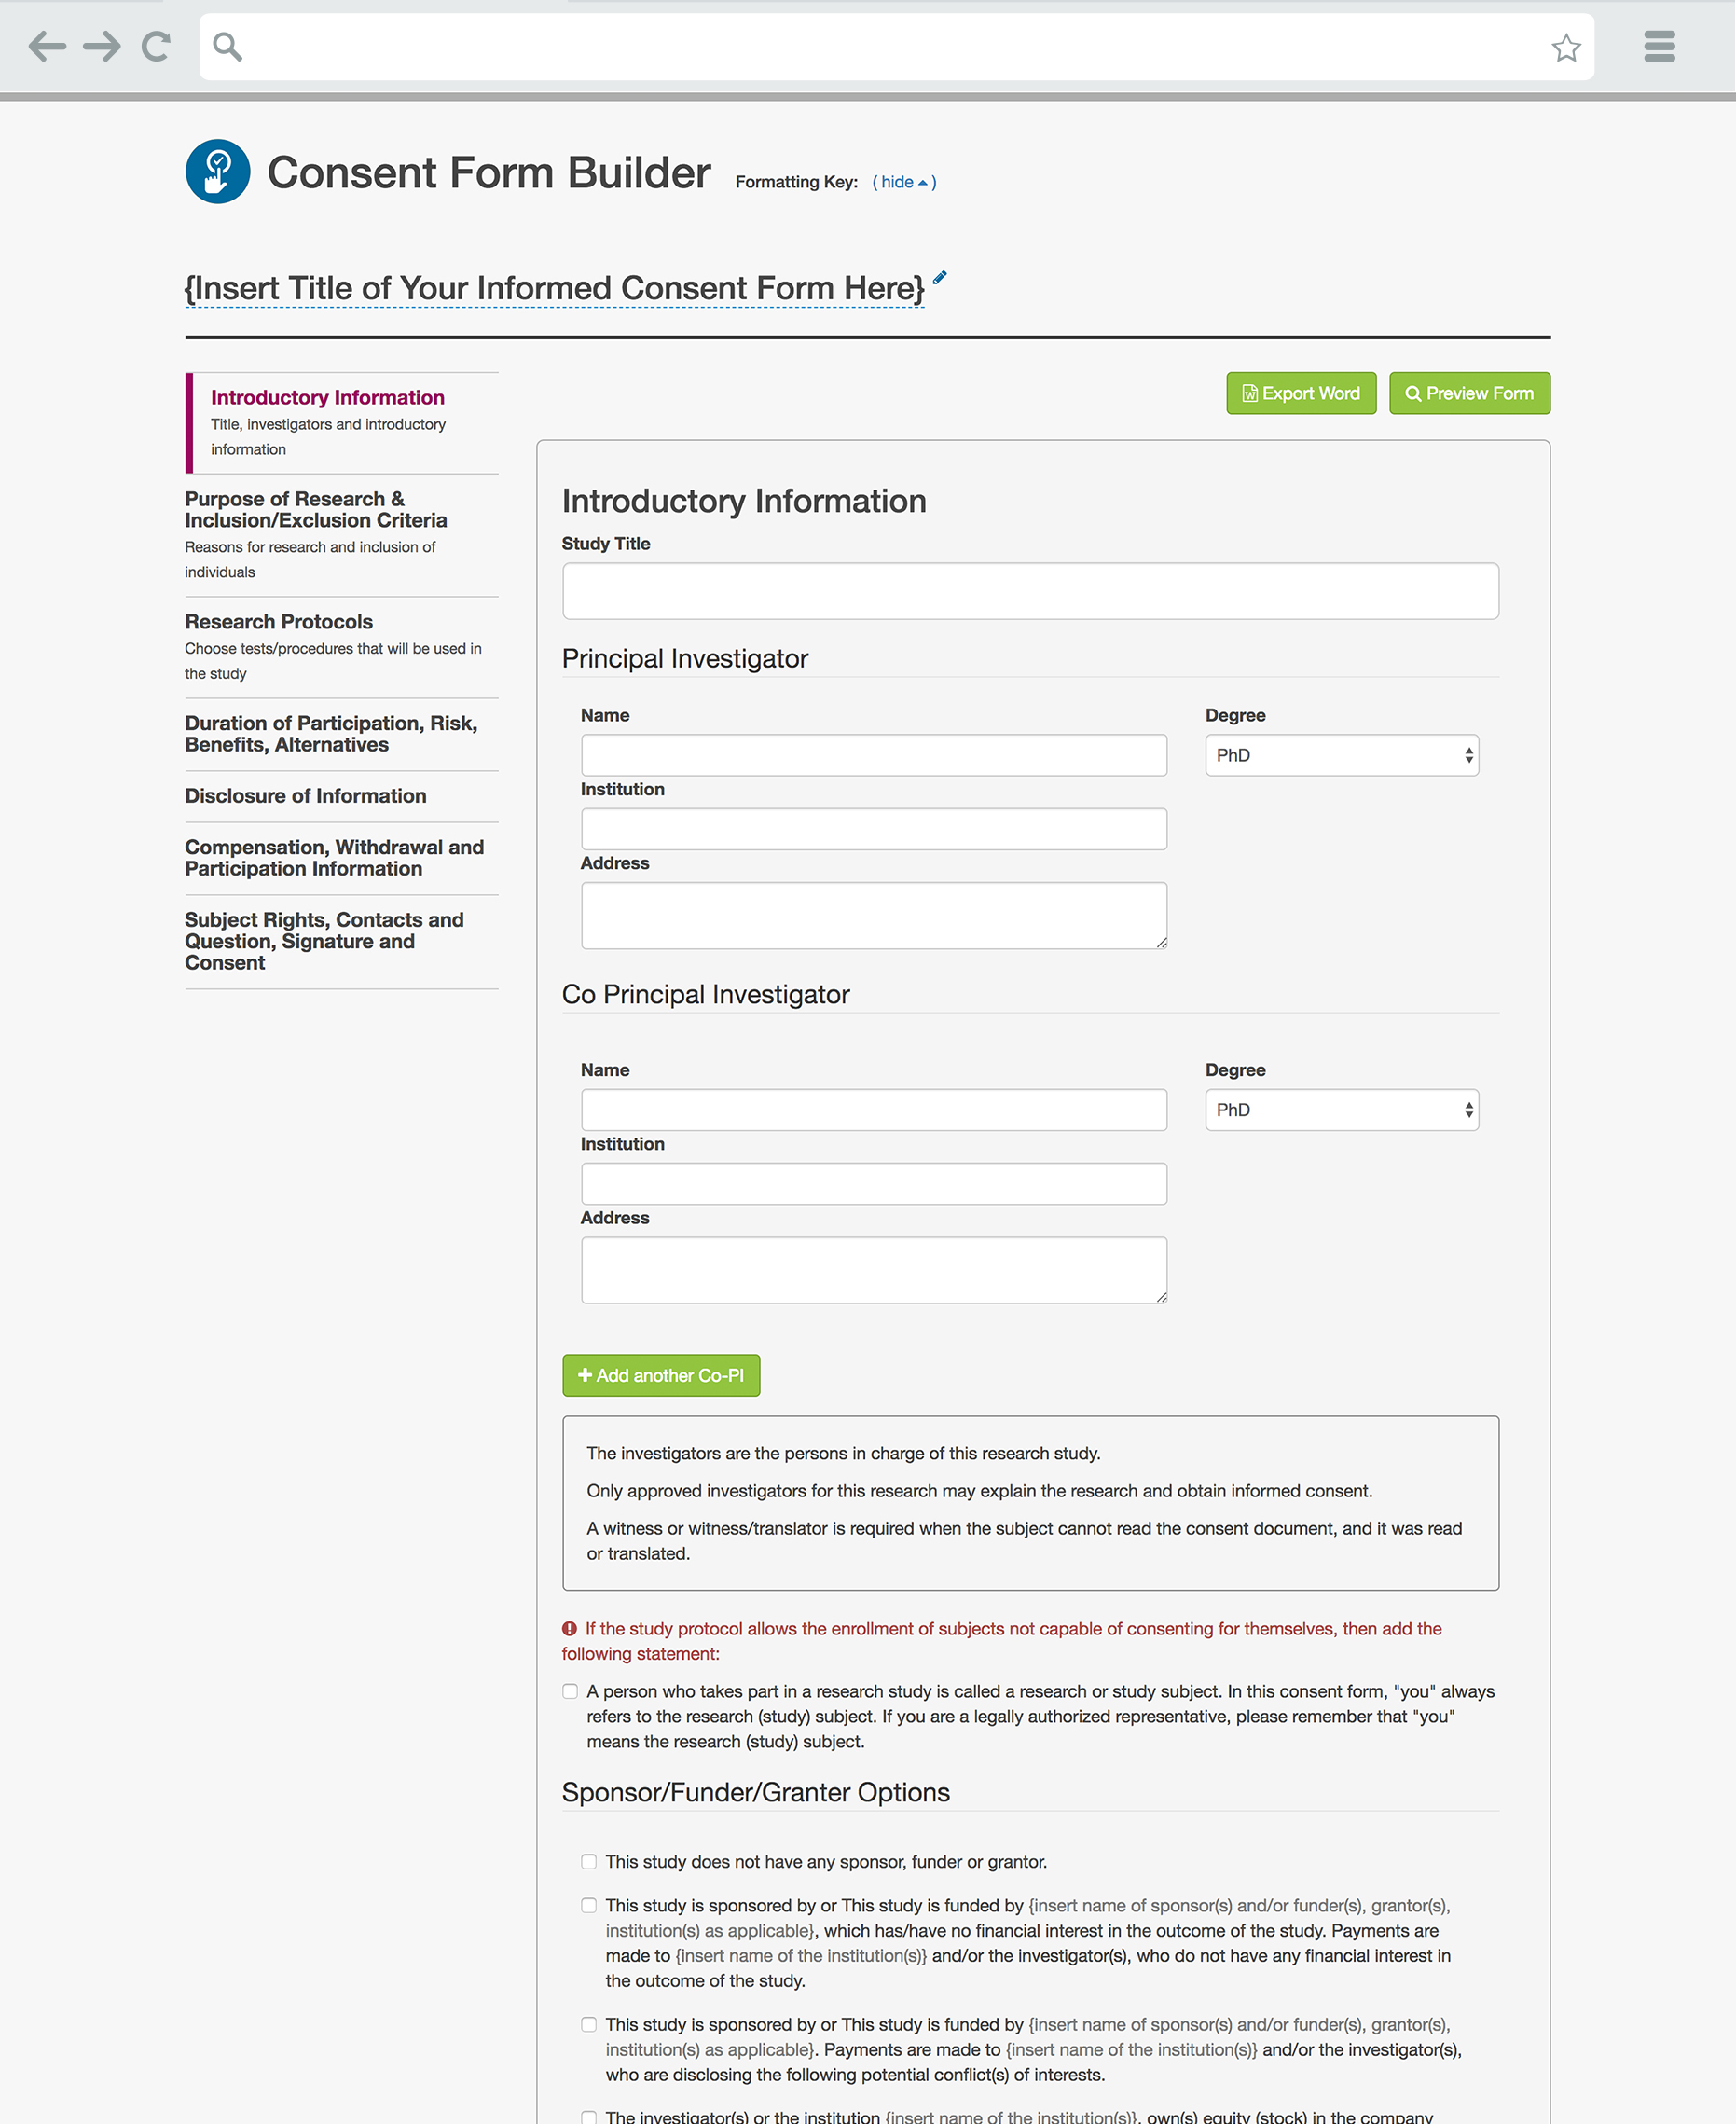 NBSTRN Consent Form Builder Page Extended